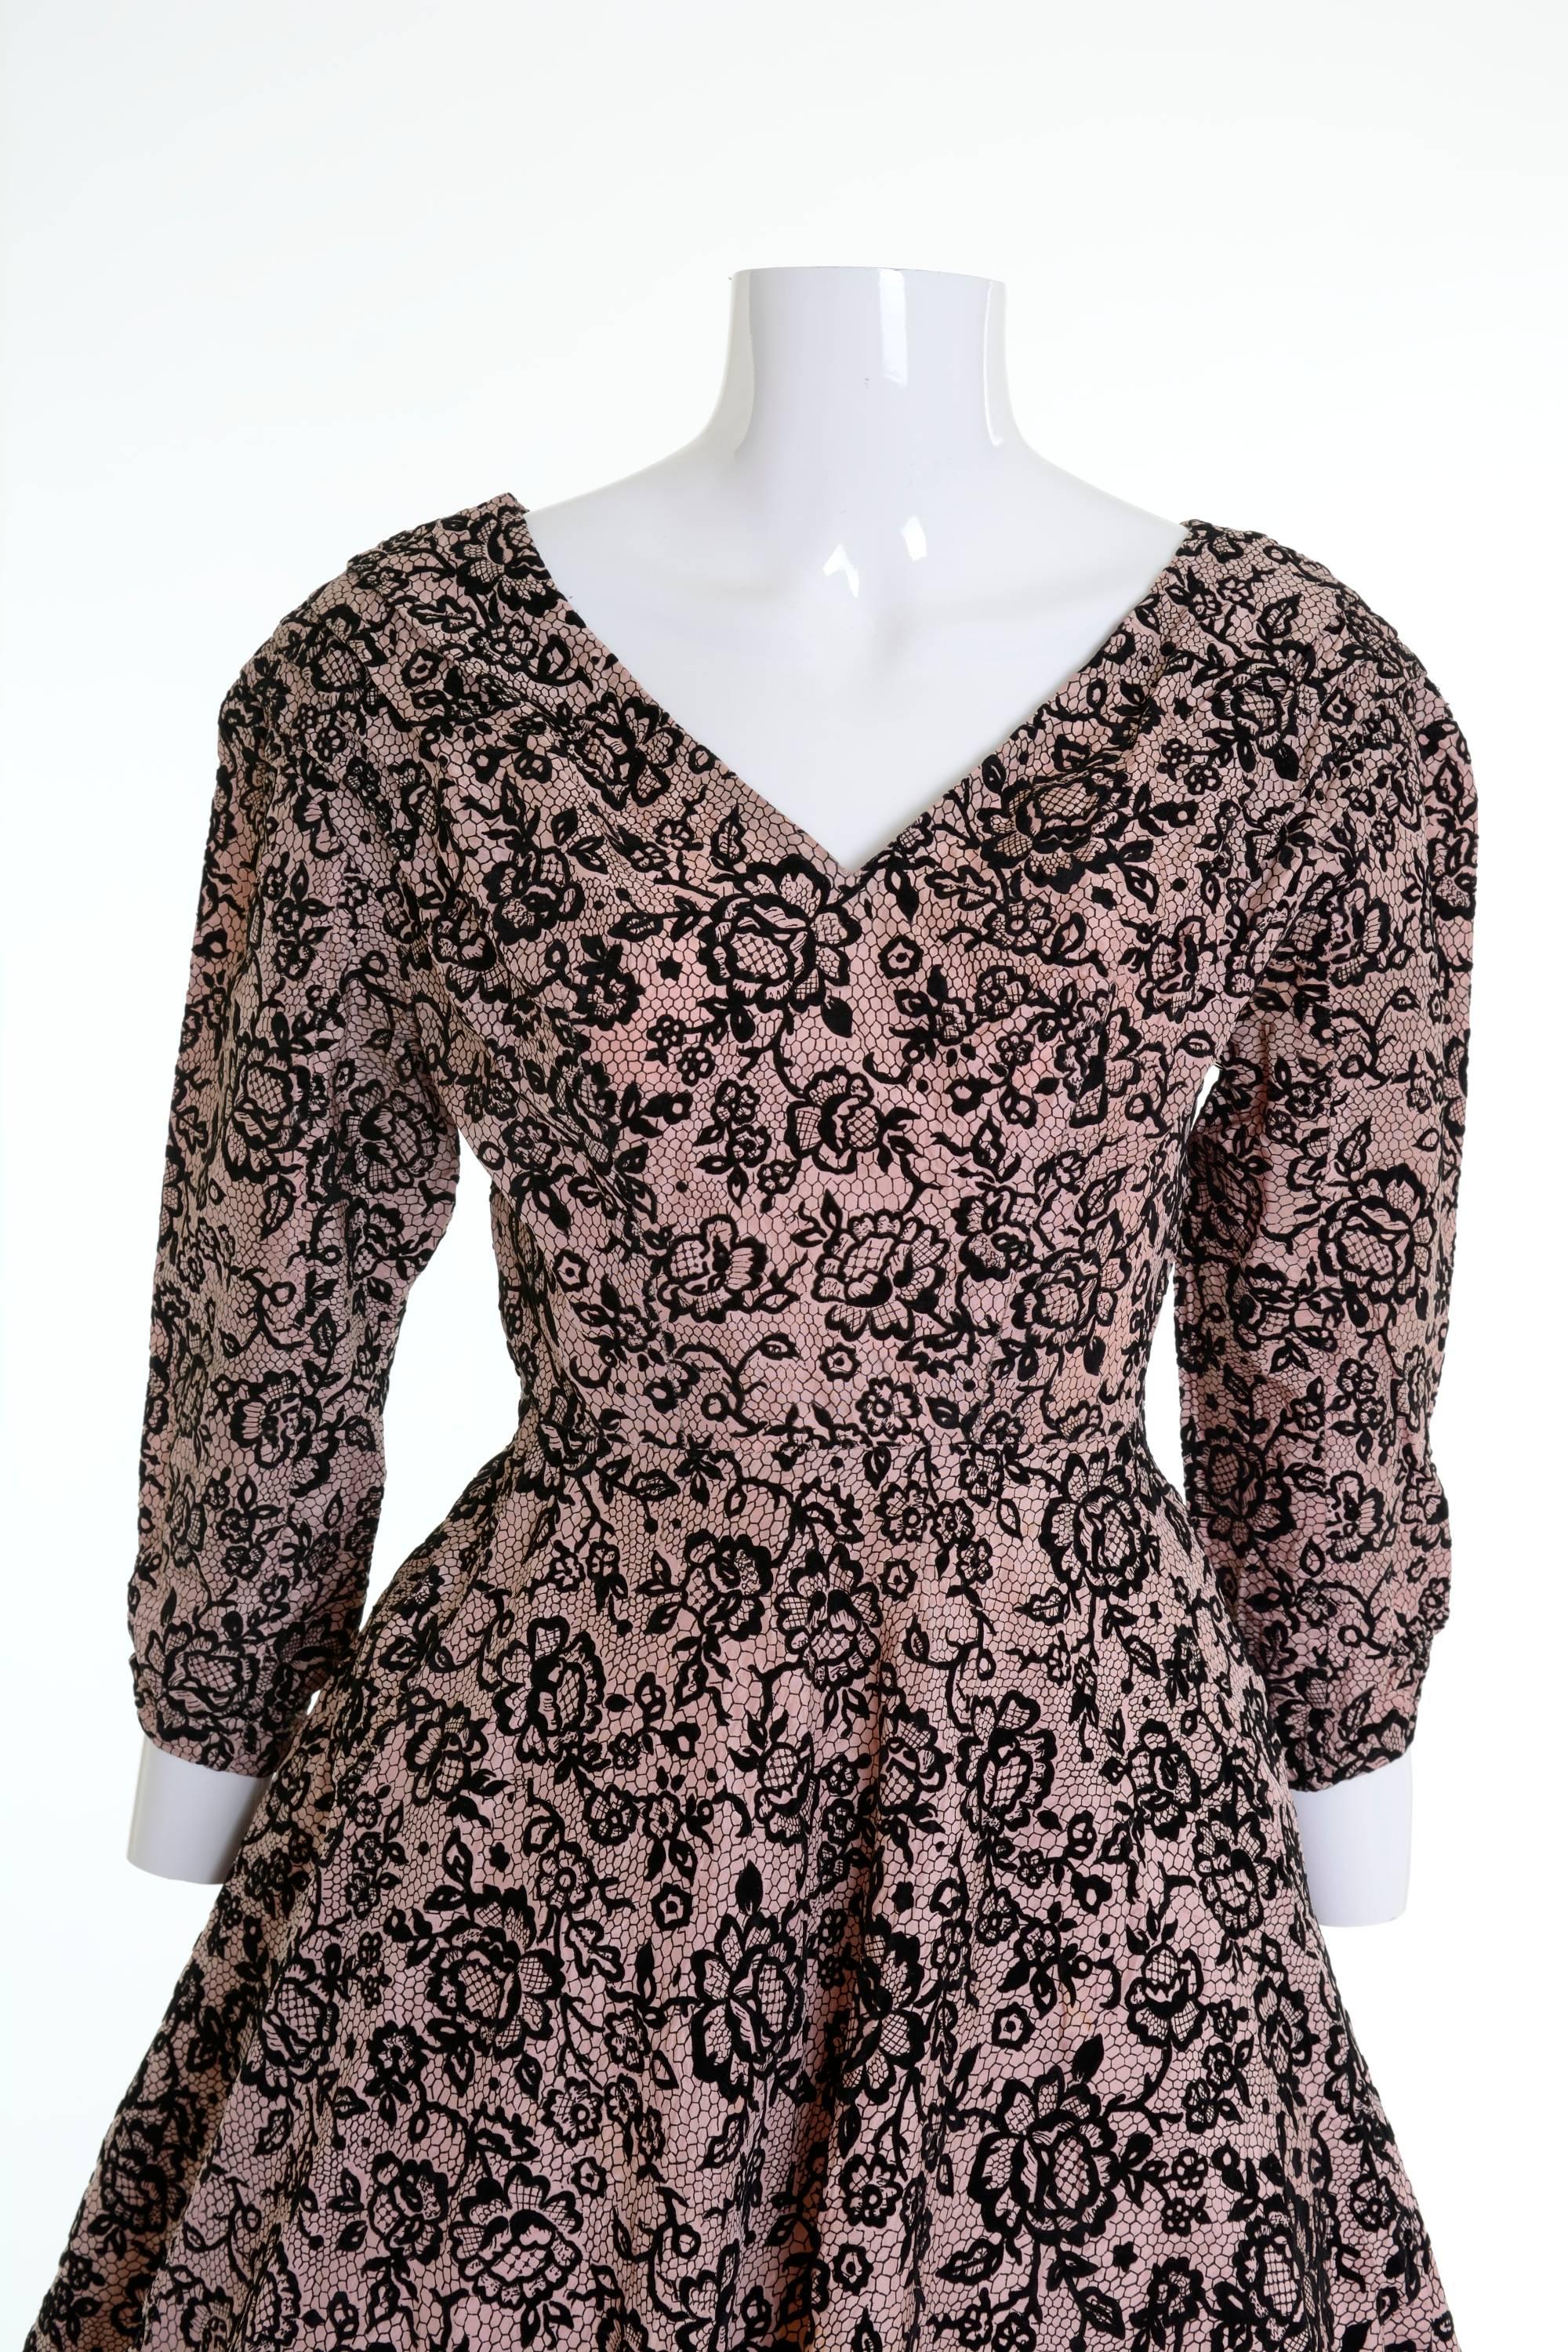 This lovely 1950s dress is in a powder pink with black velvet brocade floral print  fabric. It has 3/4 sleeve, full circle skirt and side zip closure.

Good vintage condition
 
Label: N/A
Fabric: acetate
Color: black/powder